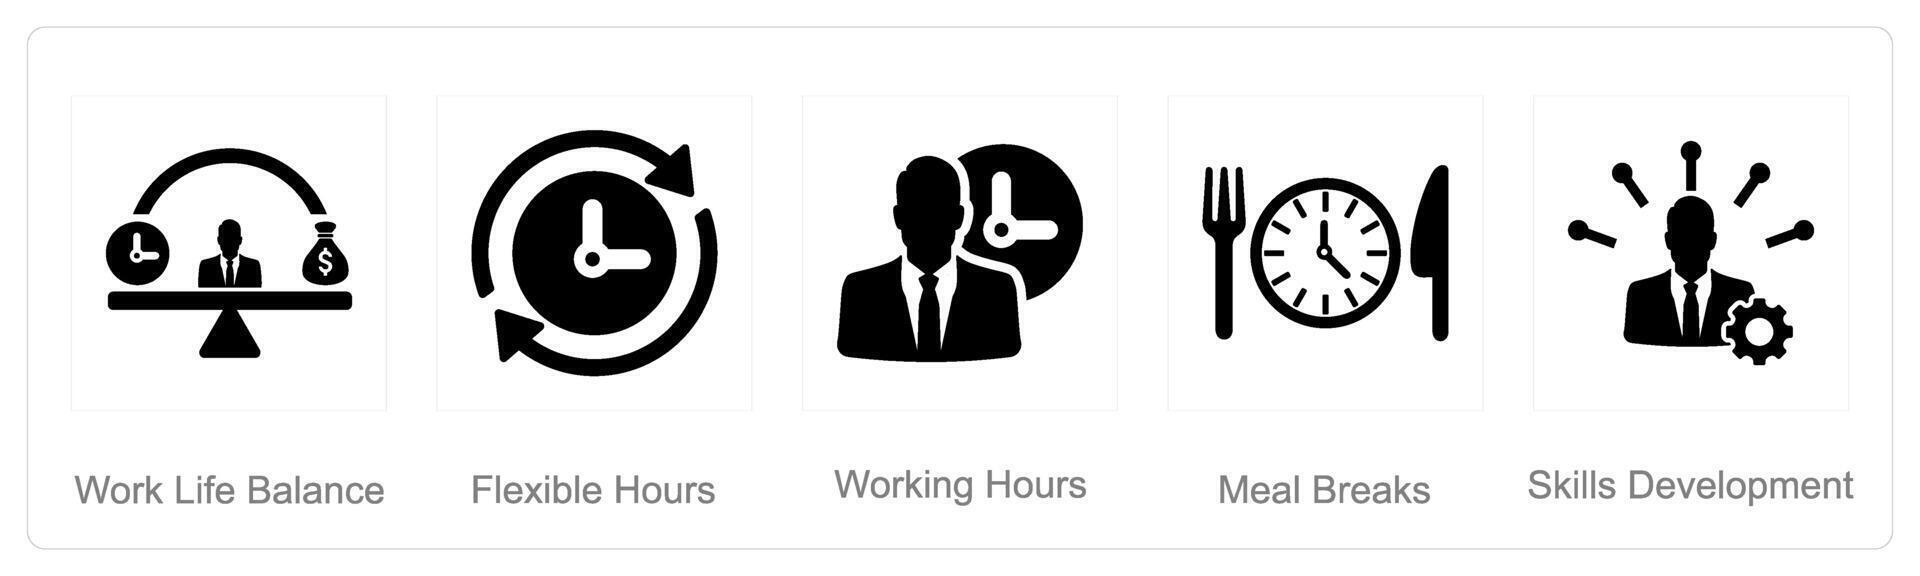 A set of 5 Employee Benefits icons as work life balance, flexible hours, working hours vector